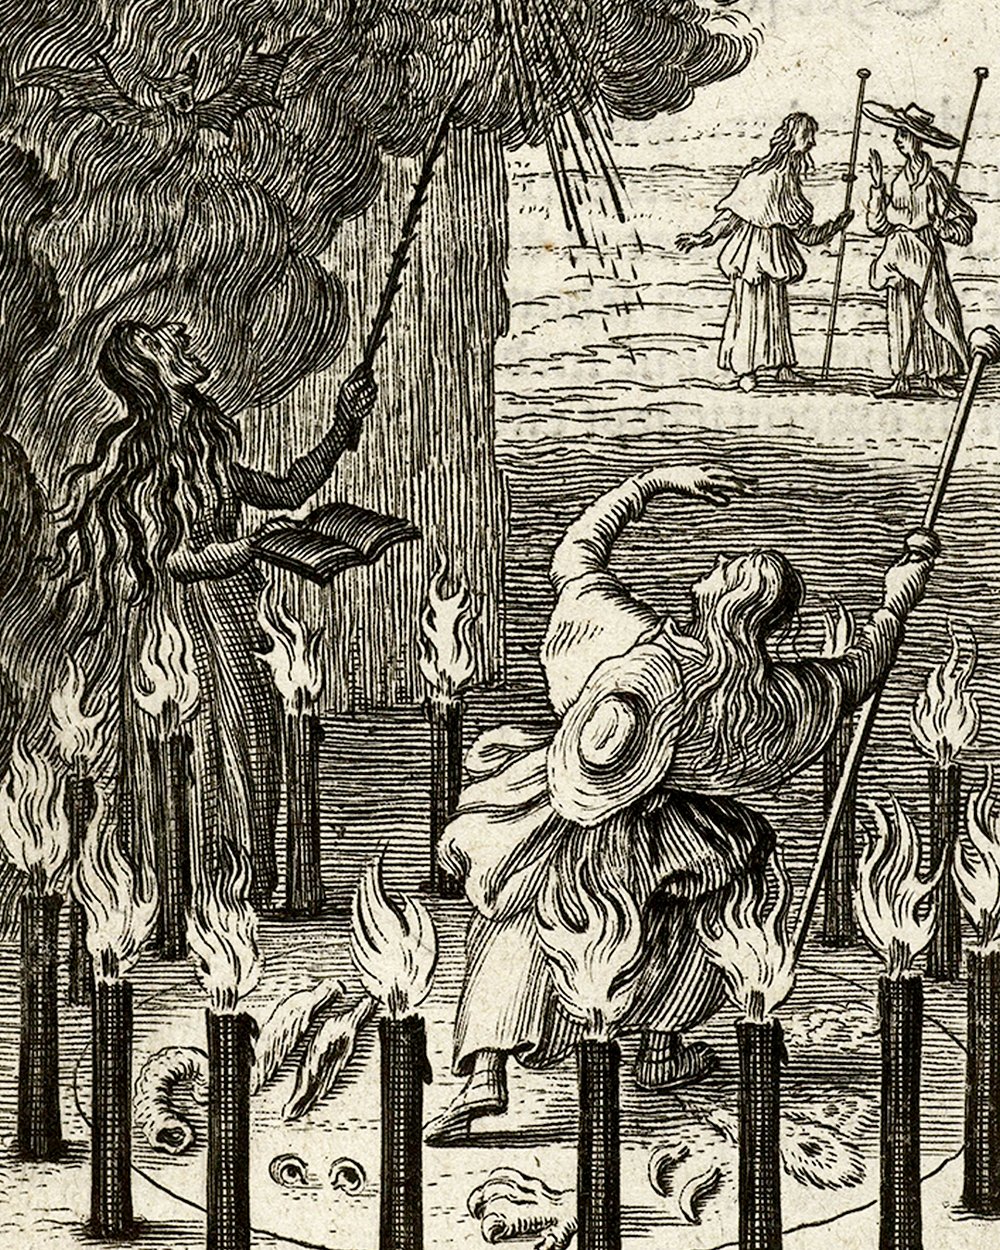 ''Witch conjures demons for Willemynken'' (1638)